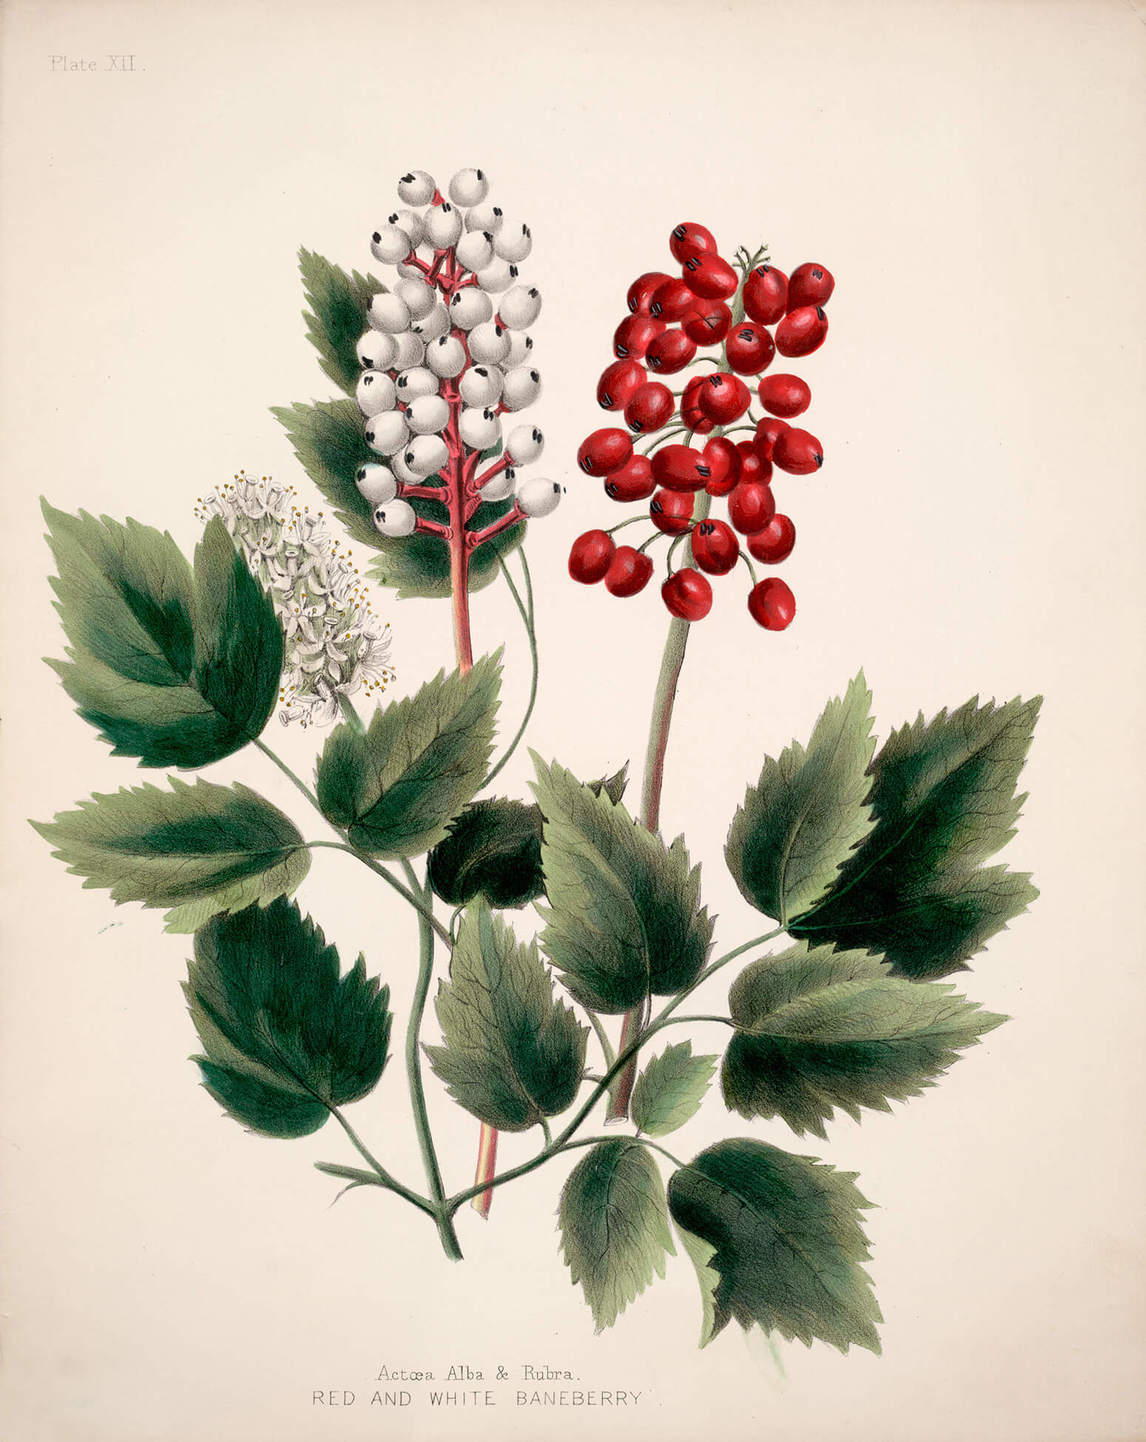 Maria Frances Ann Morris Miller, Actoea Alba and Rubra, Red and White Baneberry, 1853